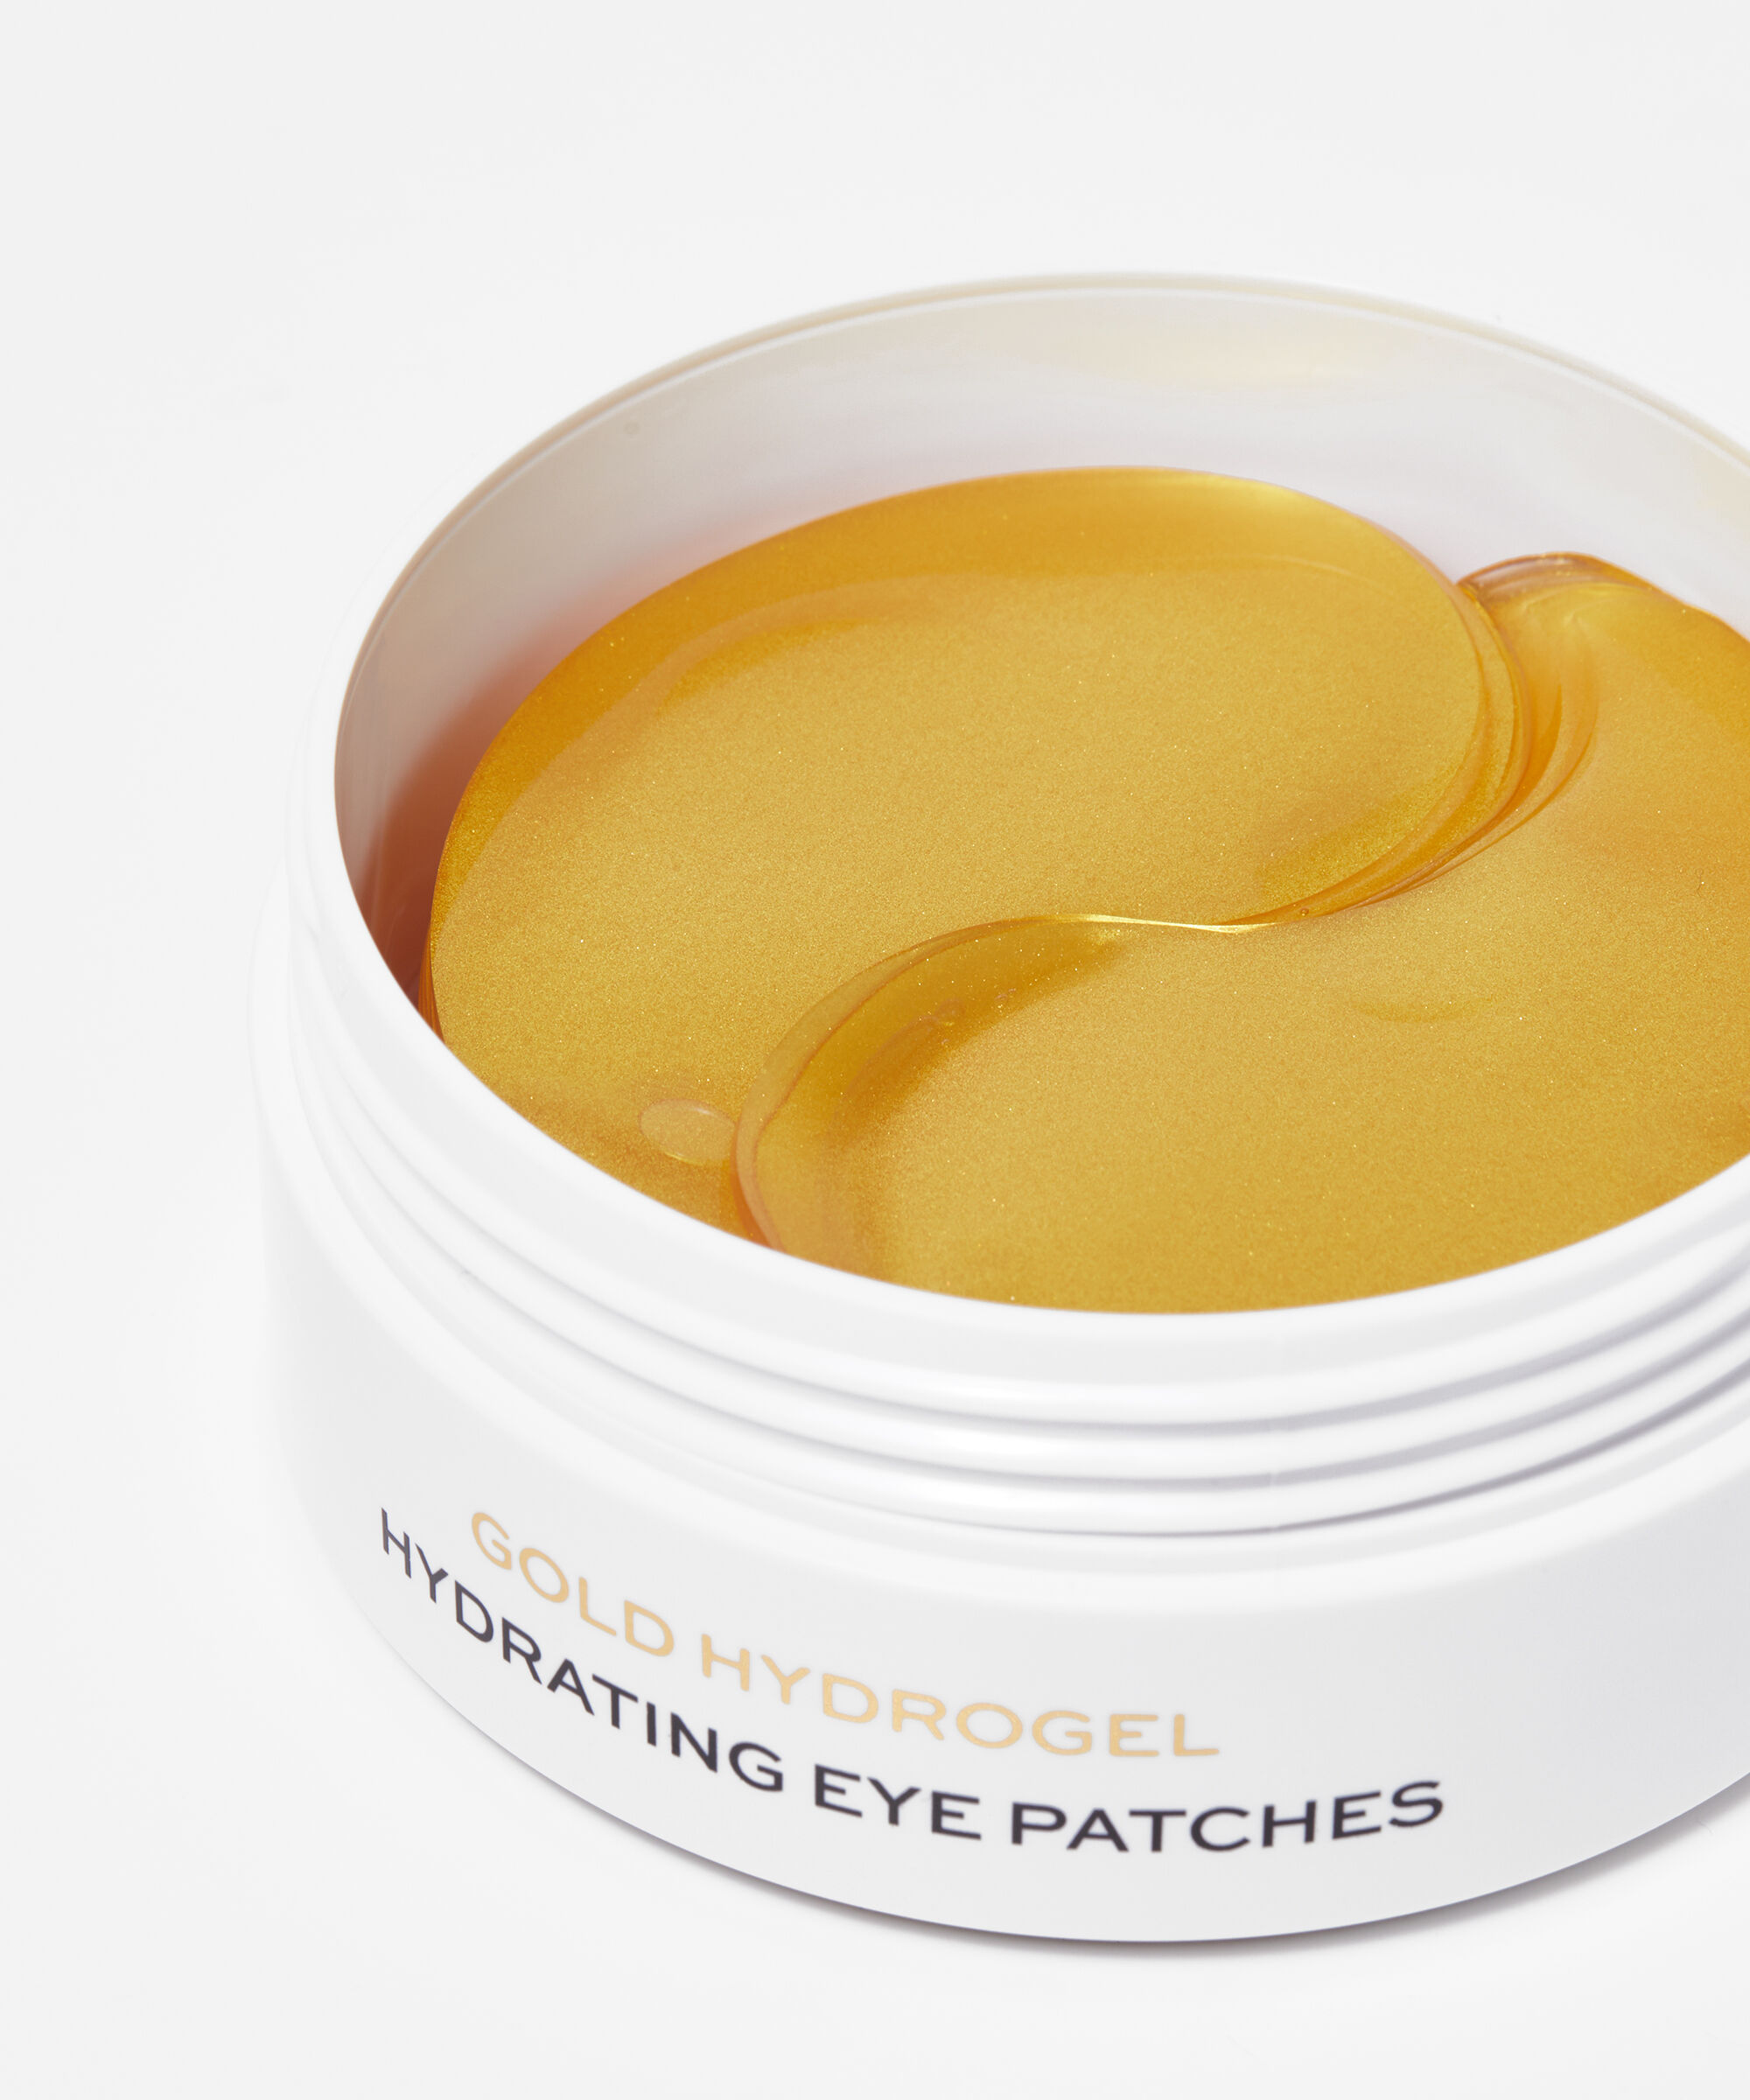 REVOLUTION SKINCARE - Gold Eye Hydrogel Hydrating Eye Patches with Colloidal Gold